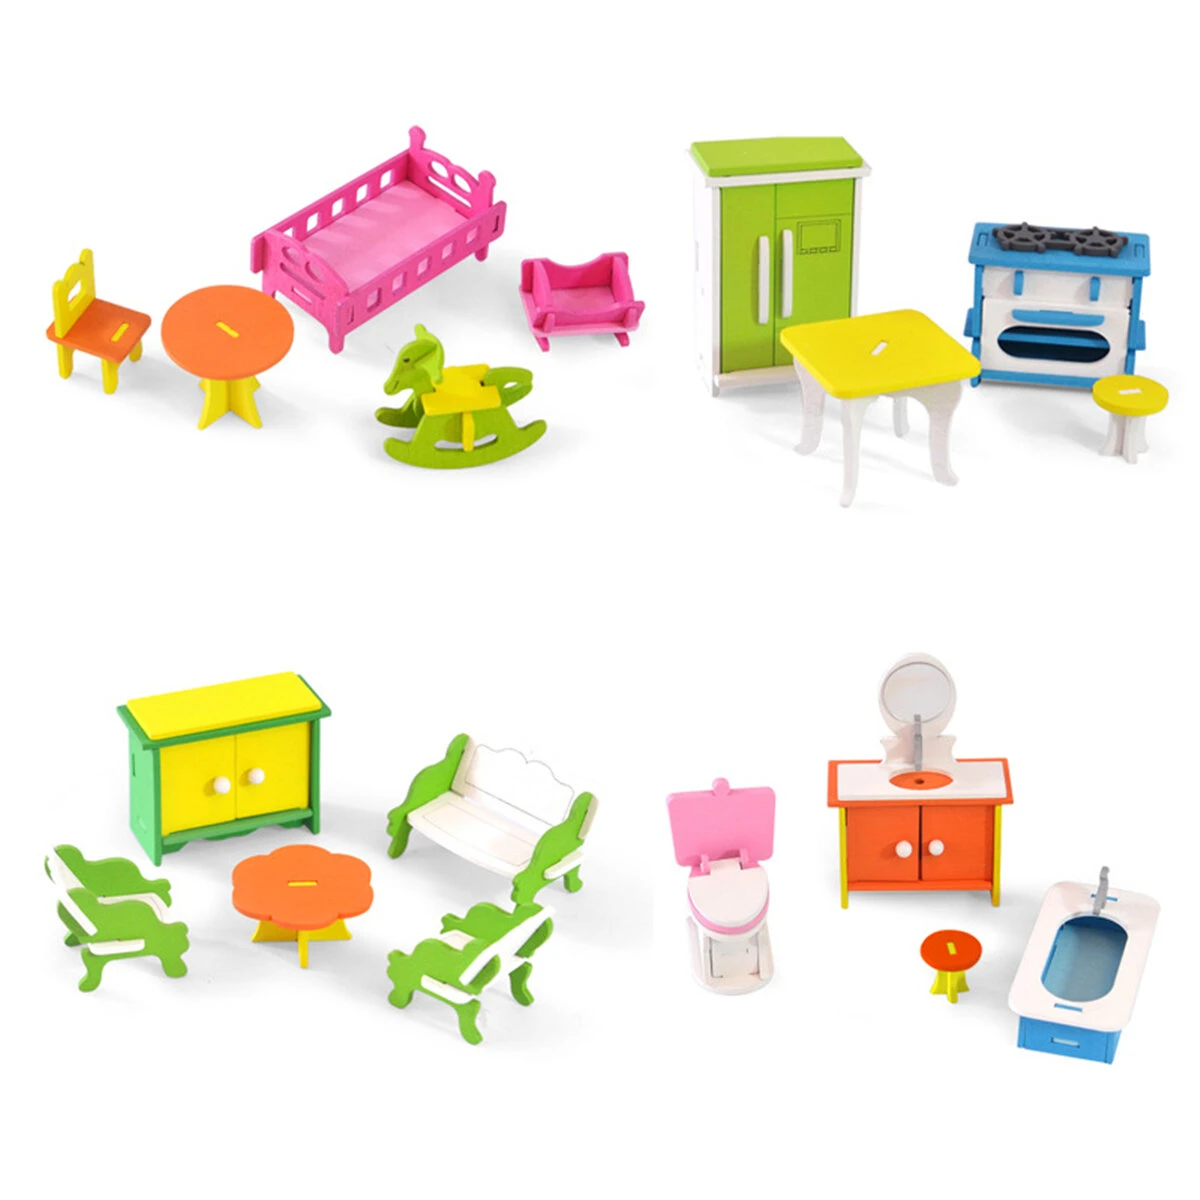 Wooden dolls house set miniature accessory living room bedroom furniture set kids pretend play toys